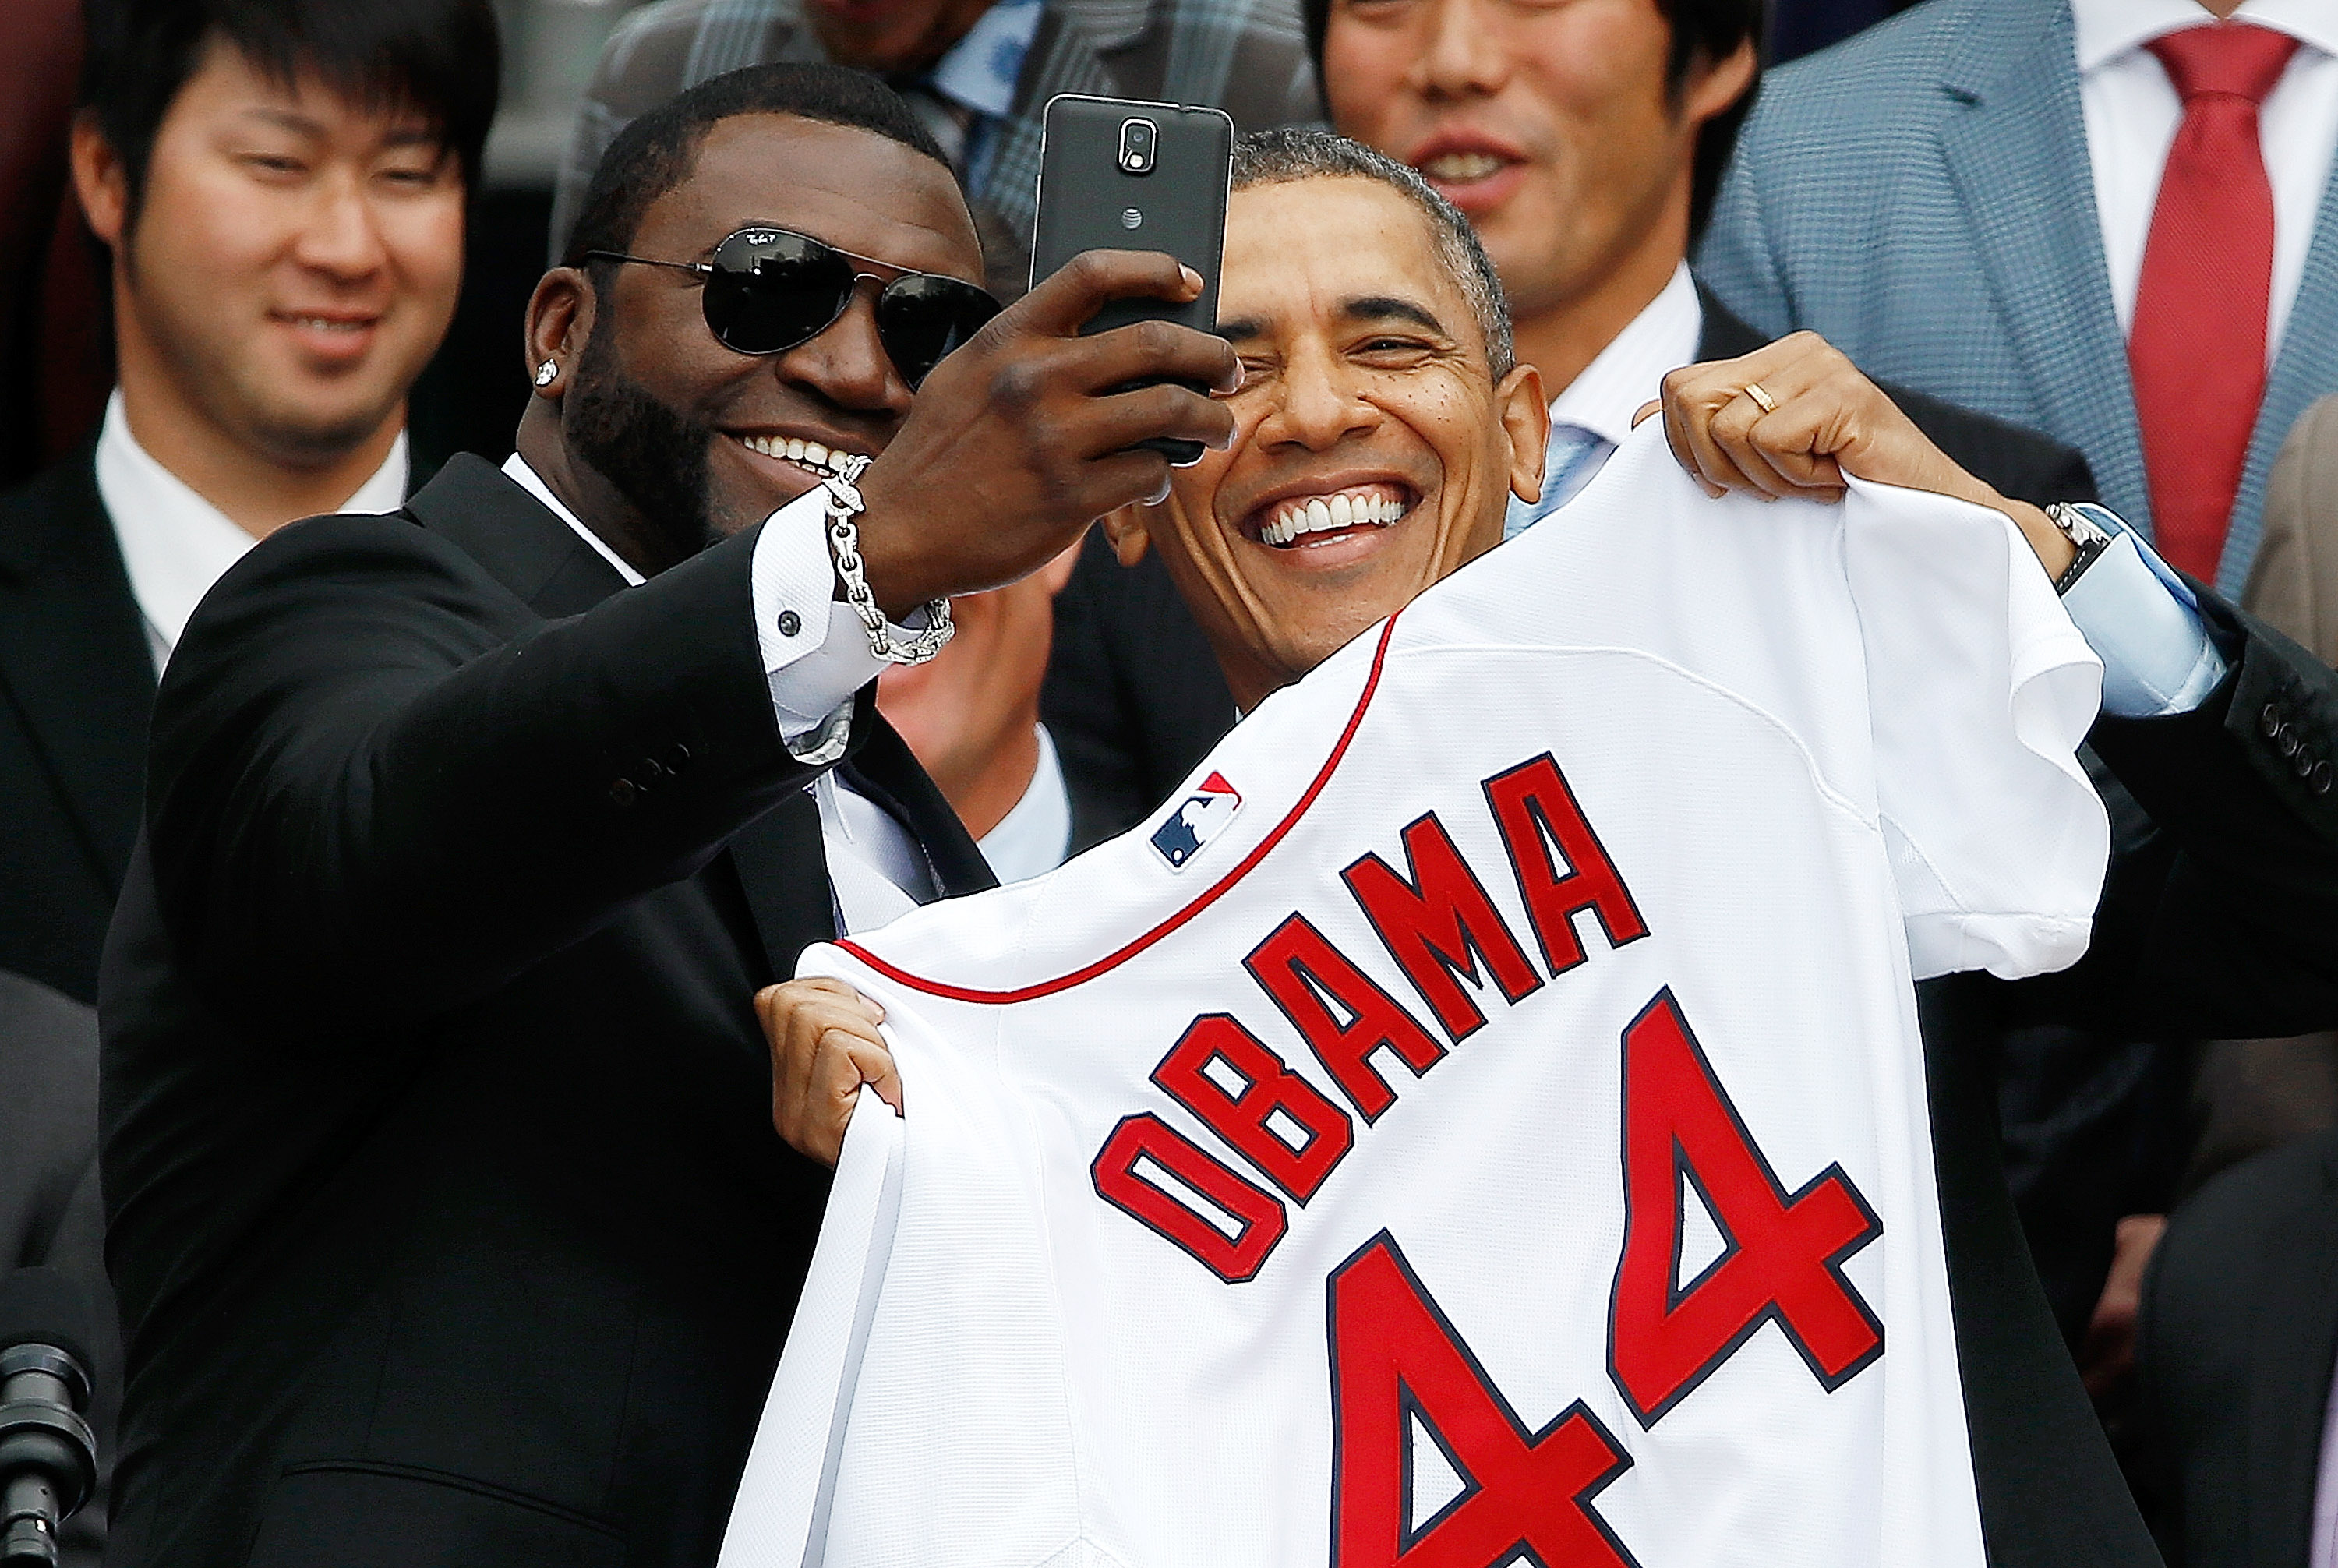 Boston Red Sox designated hitter David Ortiz (L) poses for a "selfie" with U.S. President Barack Obama during a ceremony at the White House on April 1, 2014. (Win McNamee/Getty Images)